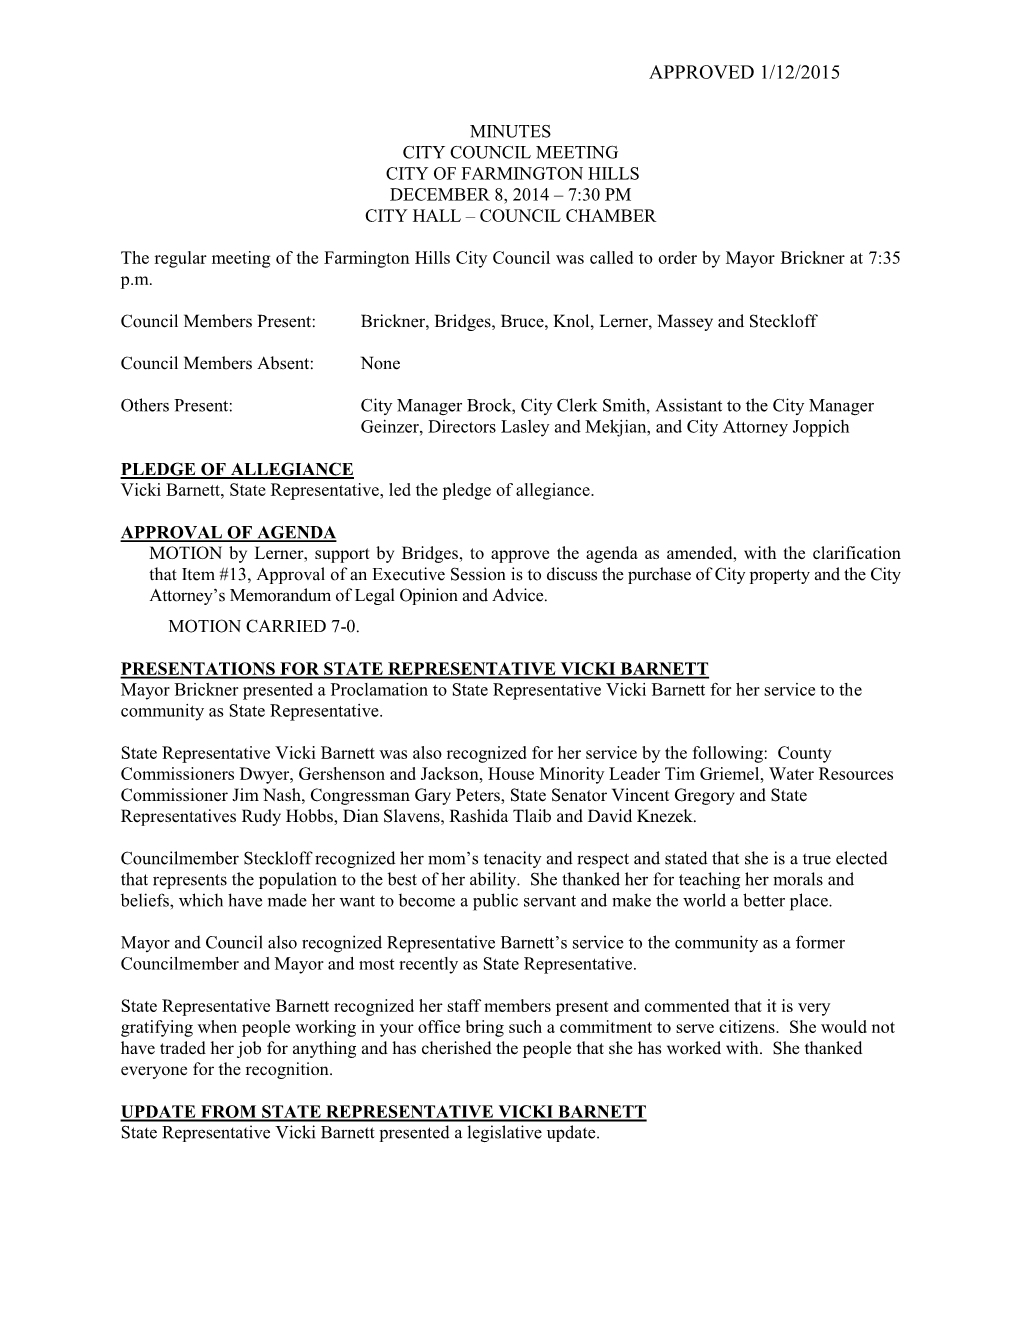 City Council Minutes of November 24, 2014) of the Consent Agenda